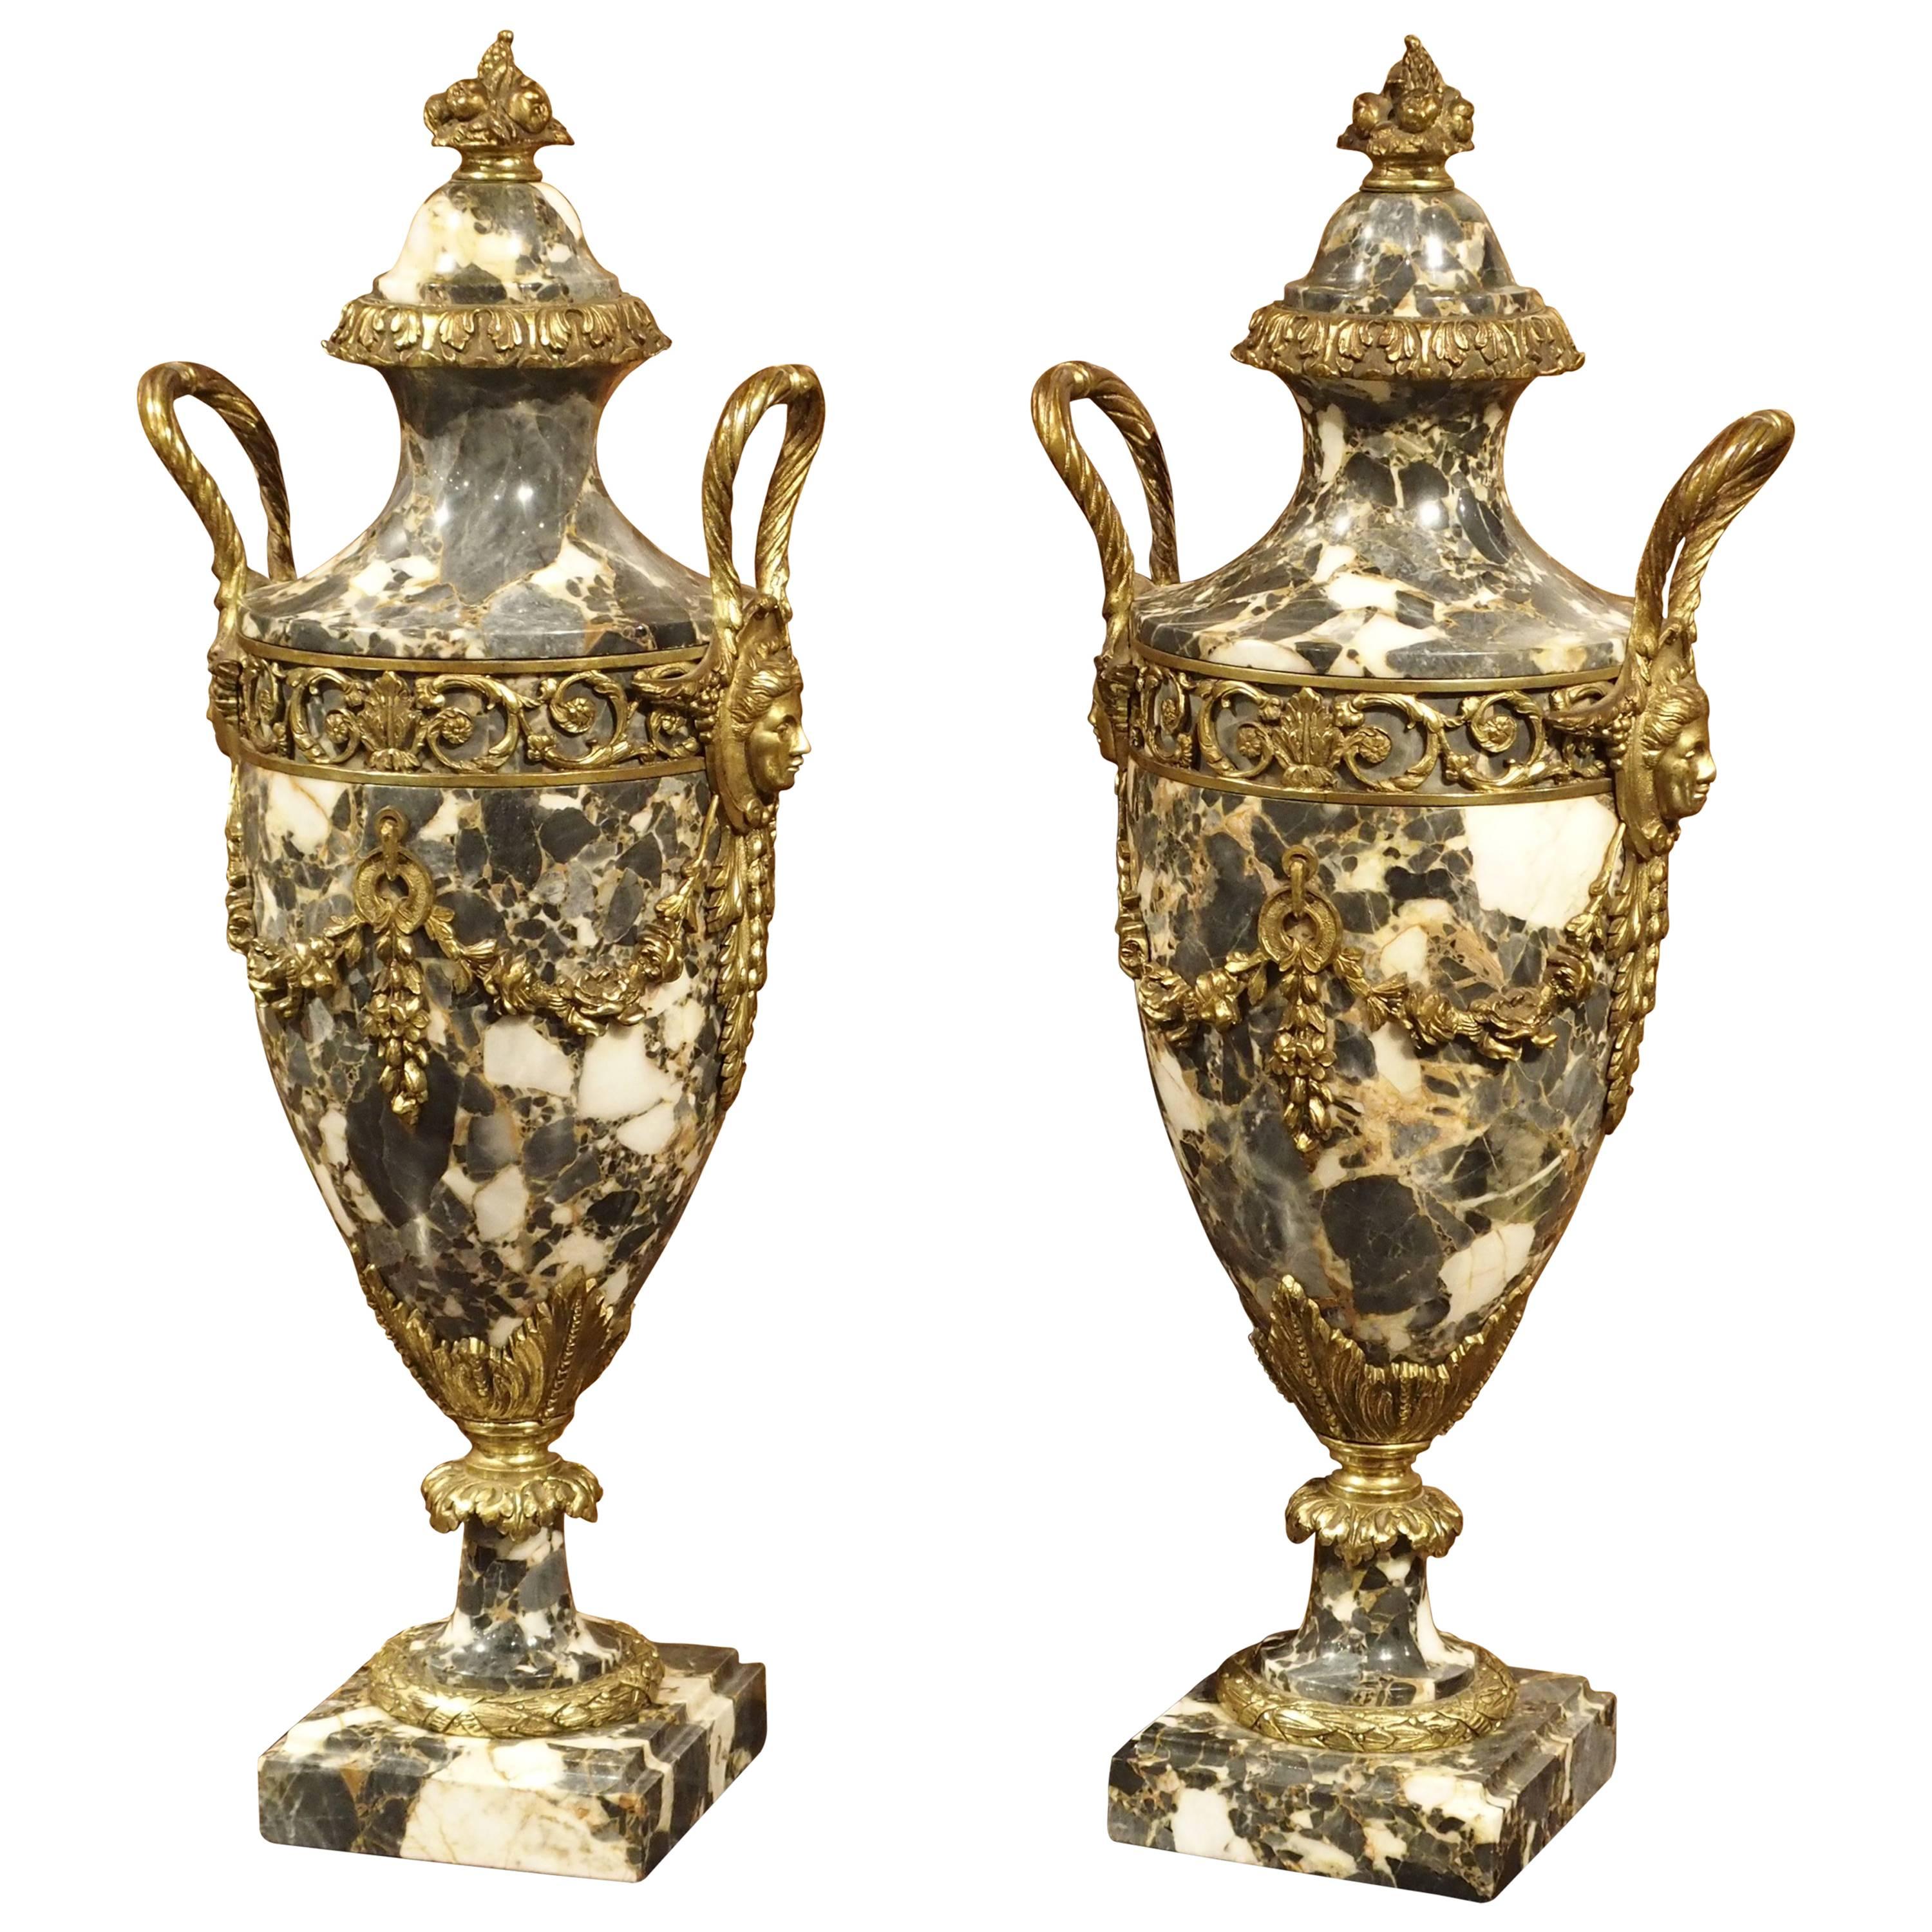 Pair of Gilt Bronze and Marble Cassolettes from France, circa 1870